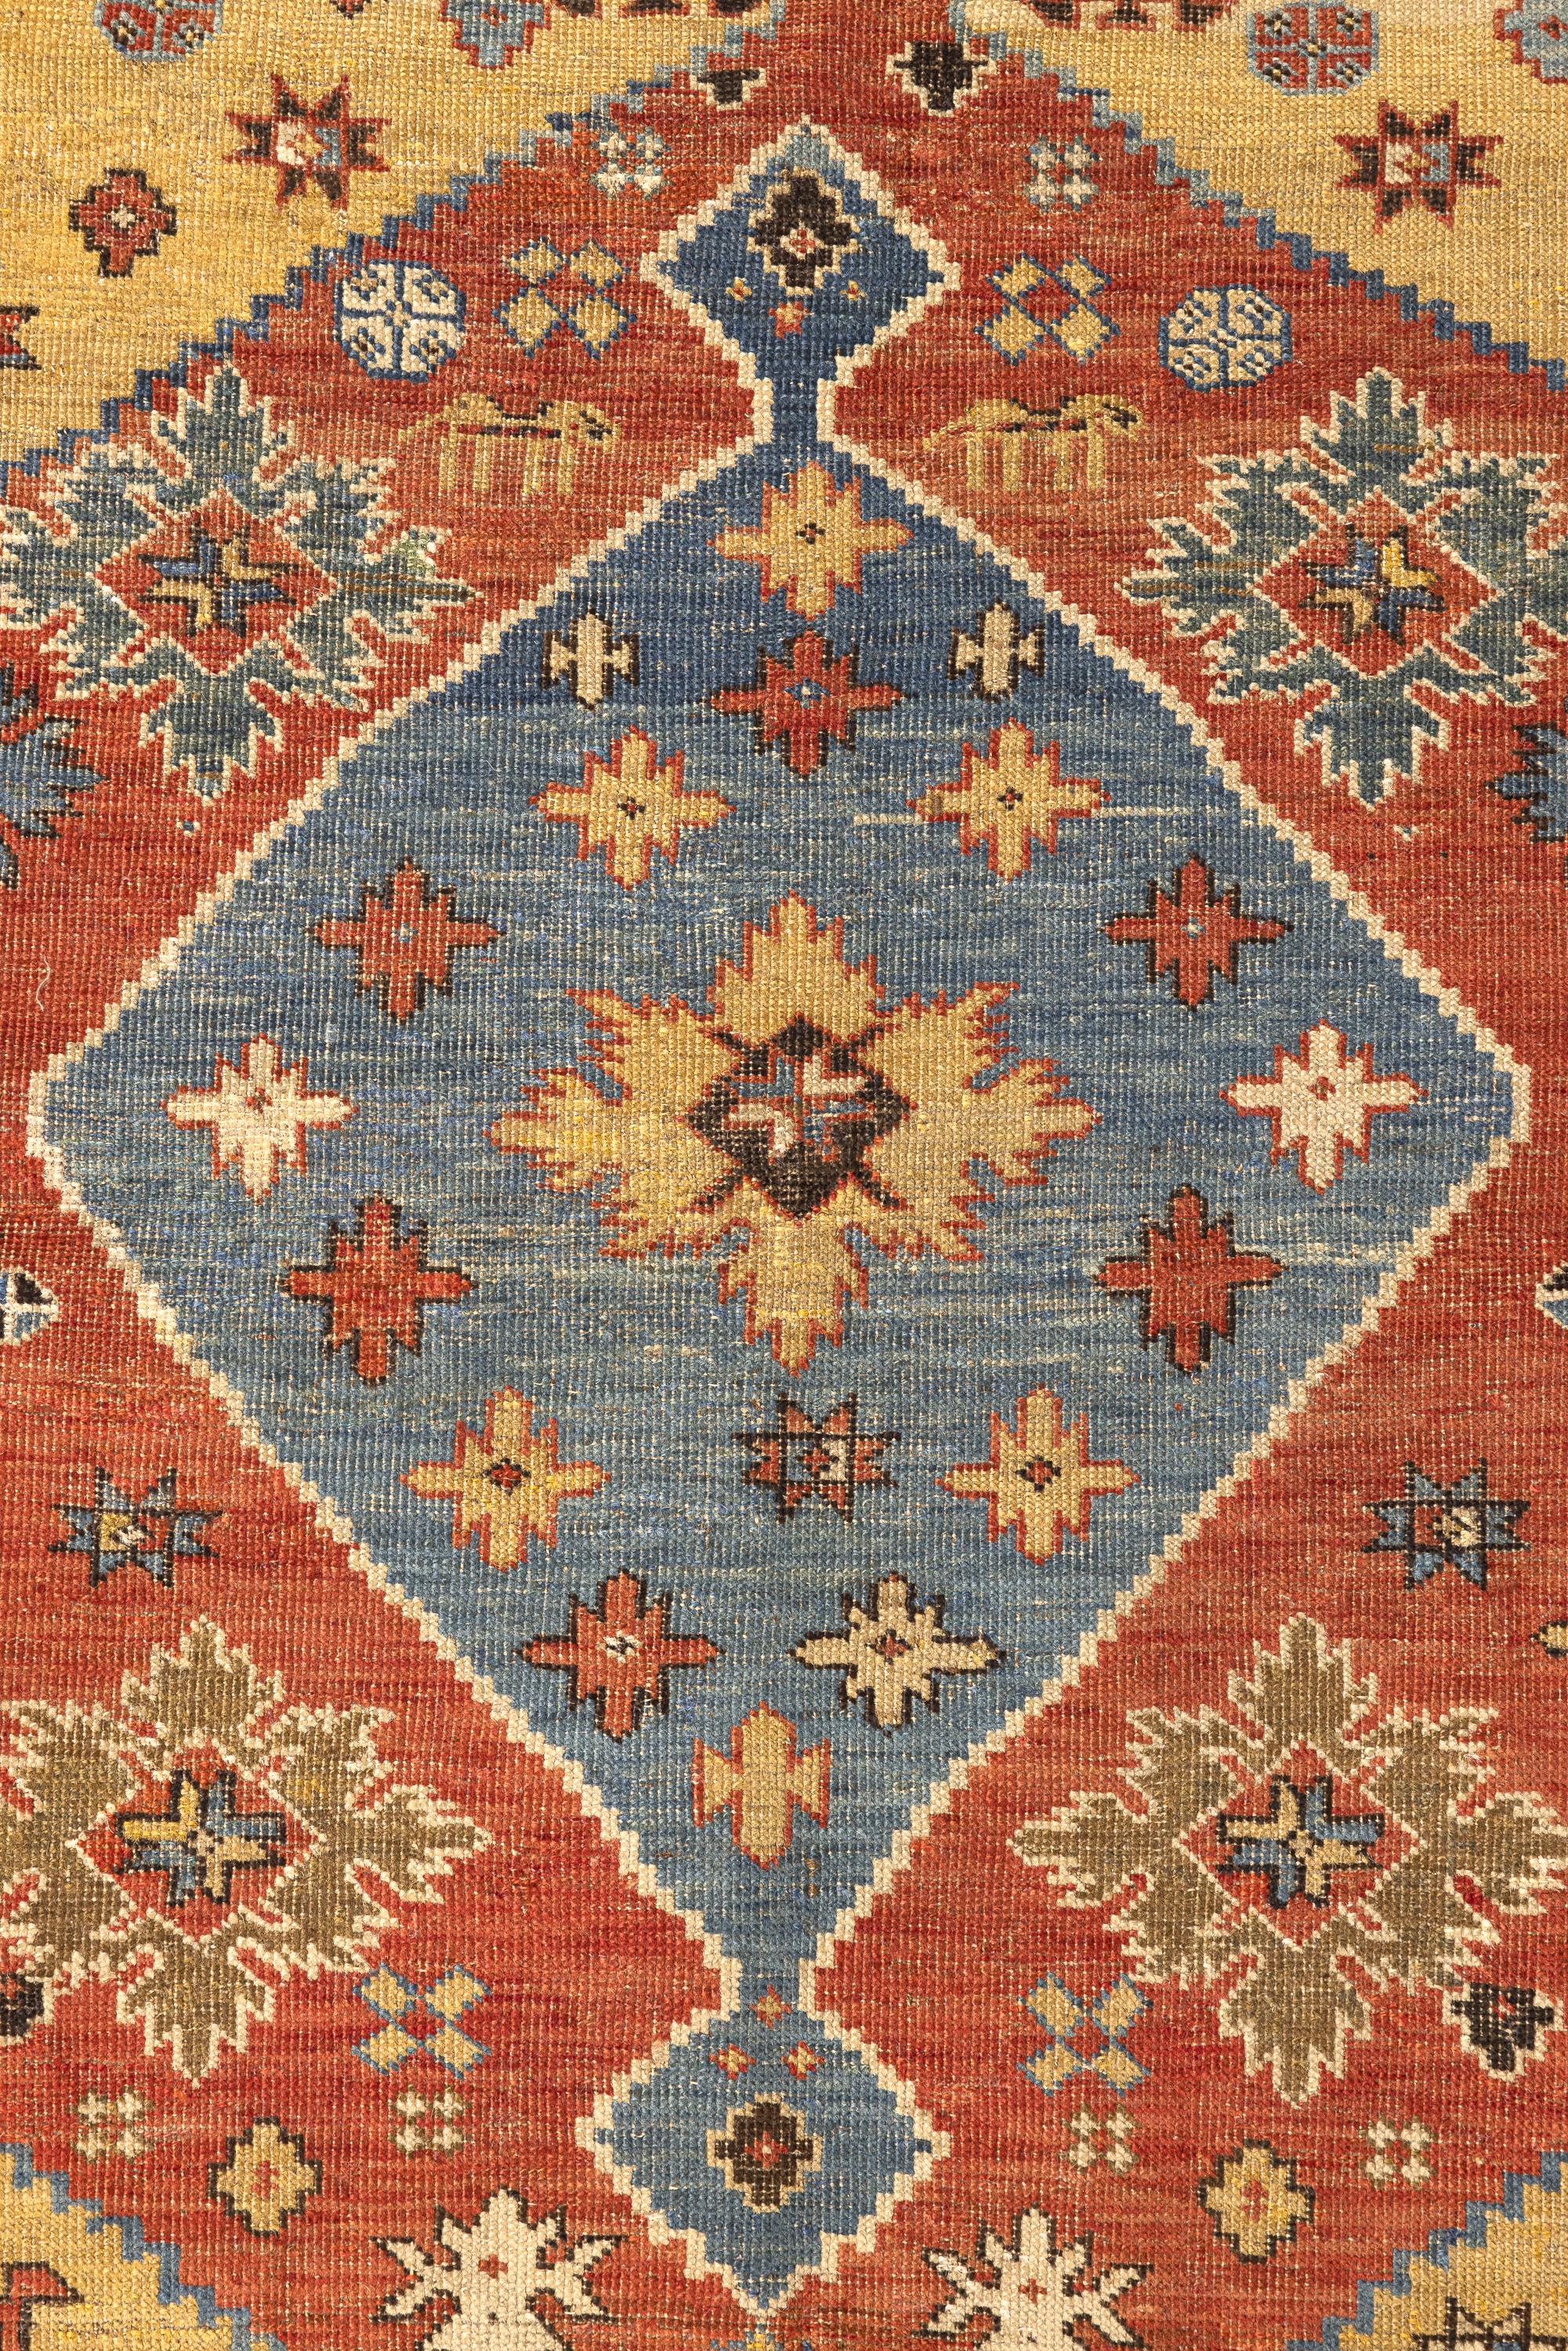 Shirvan – Southeast Caucasus

This cheerful Shirvan features a red medallion with a sky-blue diamond over the yellow field. The entire area of the rug is filled with staggered polygons, stars and other geometric figures that illuminate the carpet